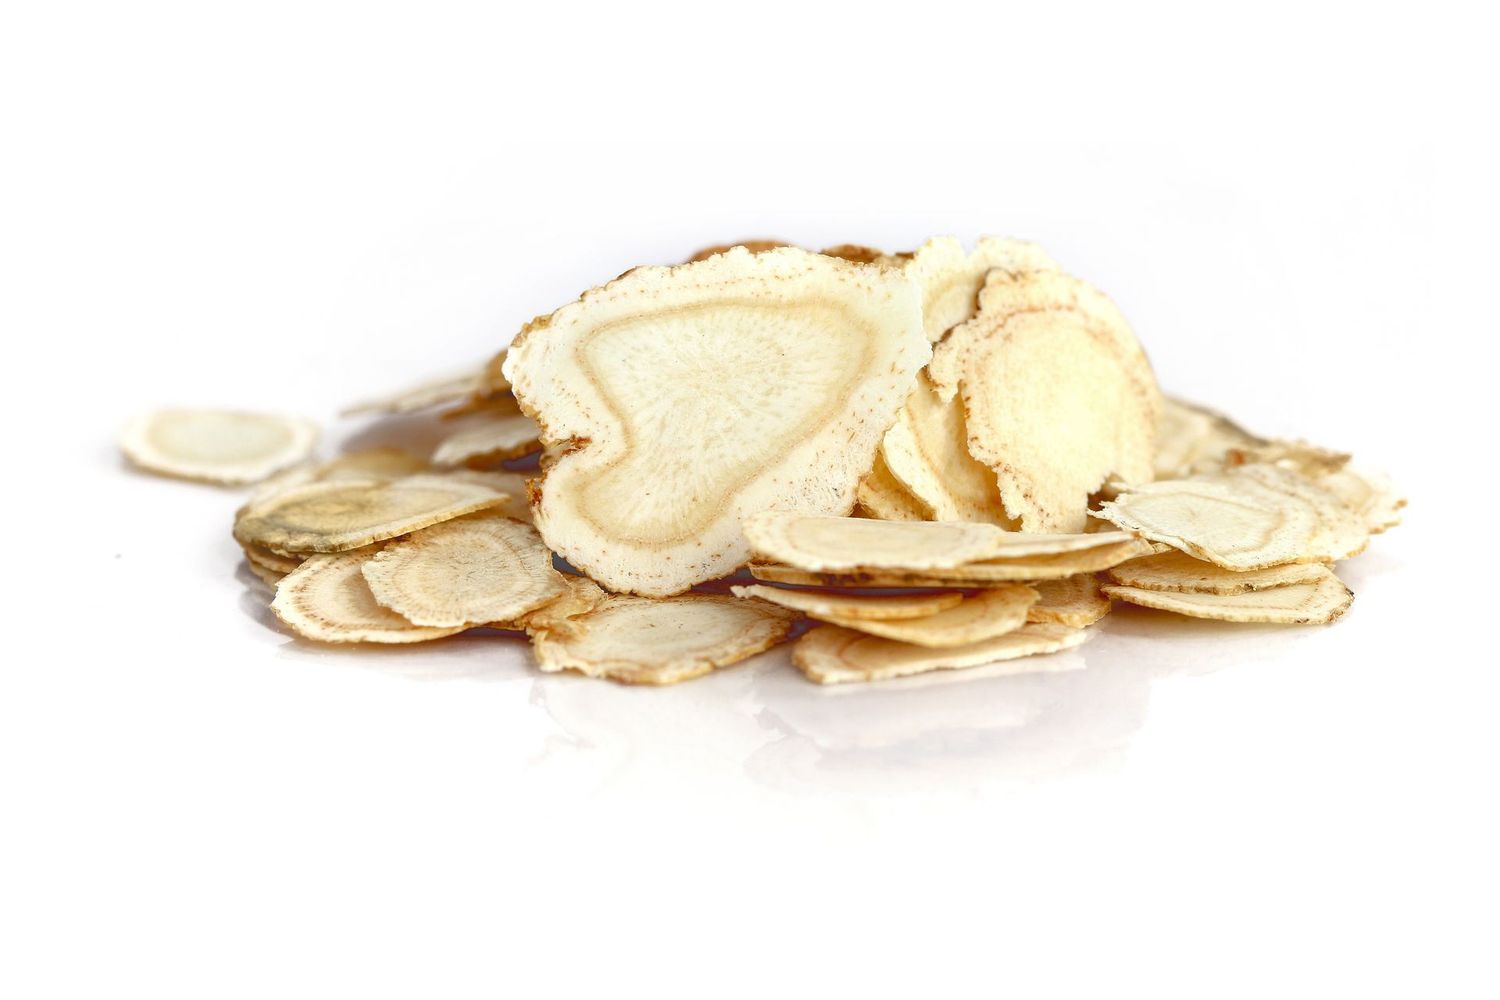 Dried Sliced Ginseng